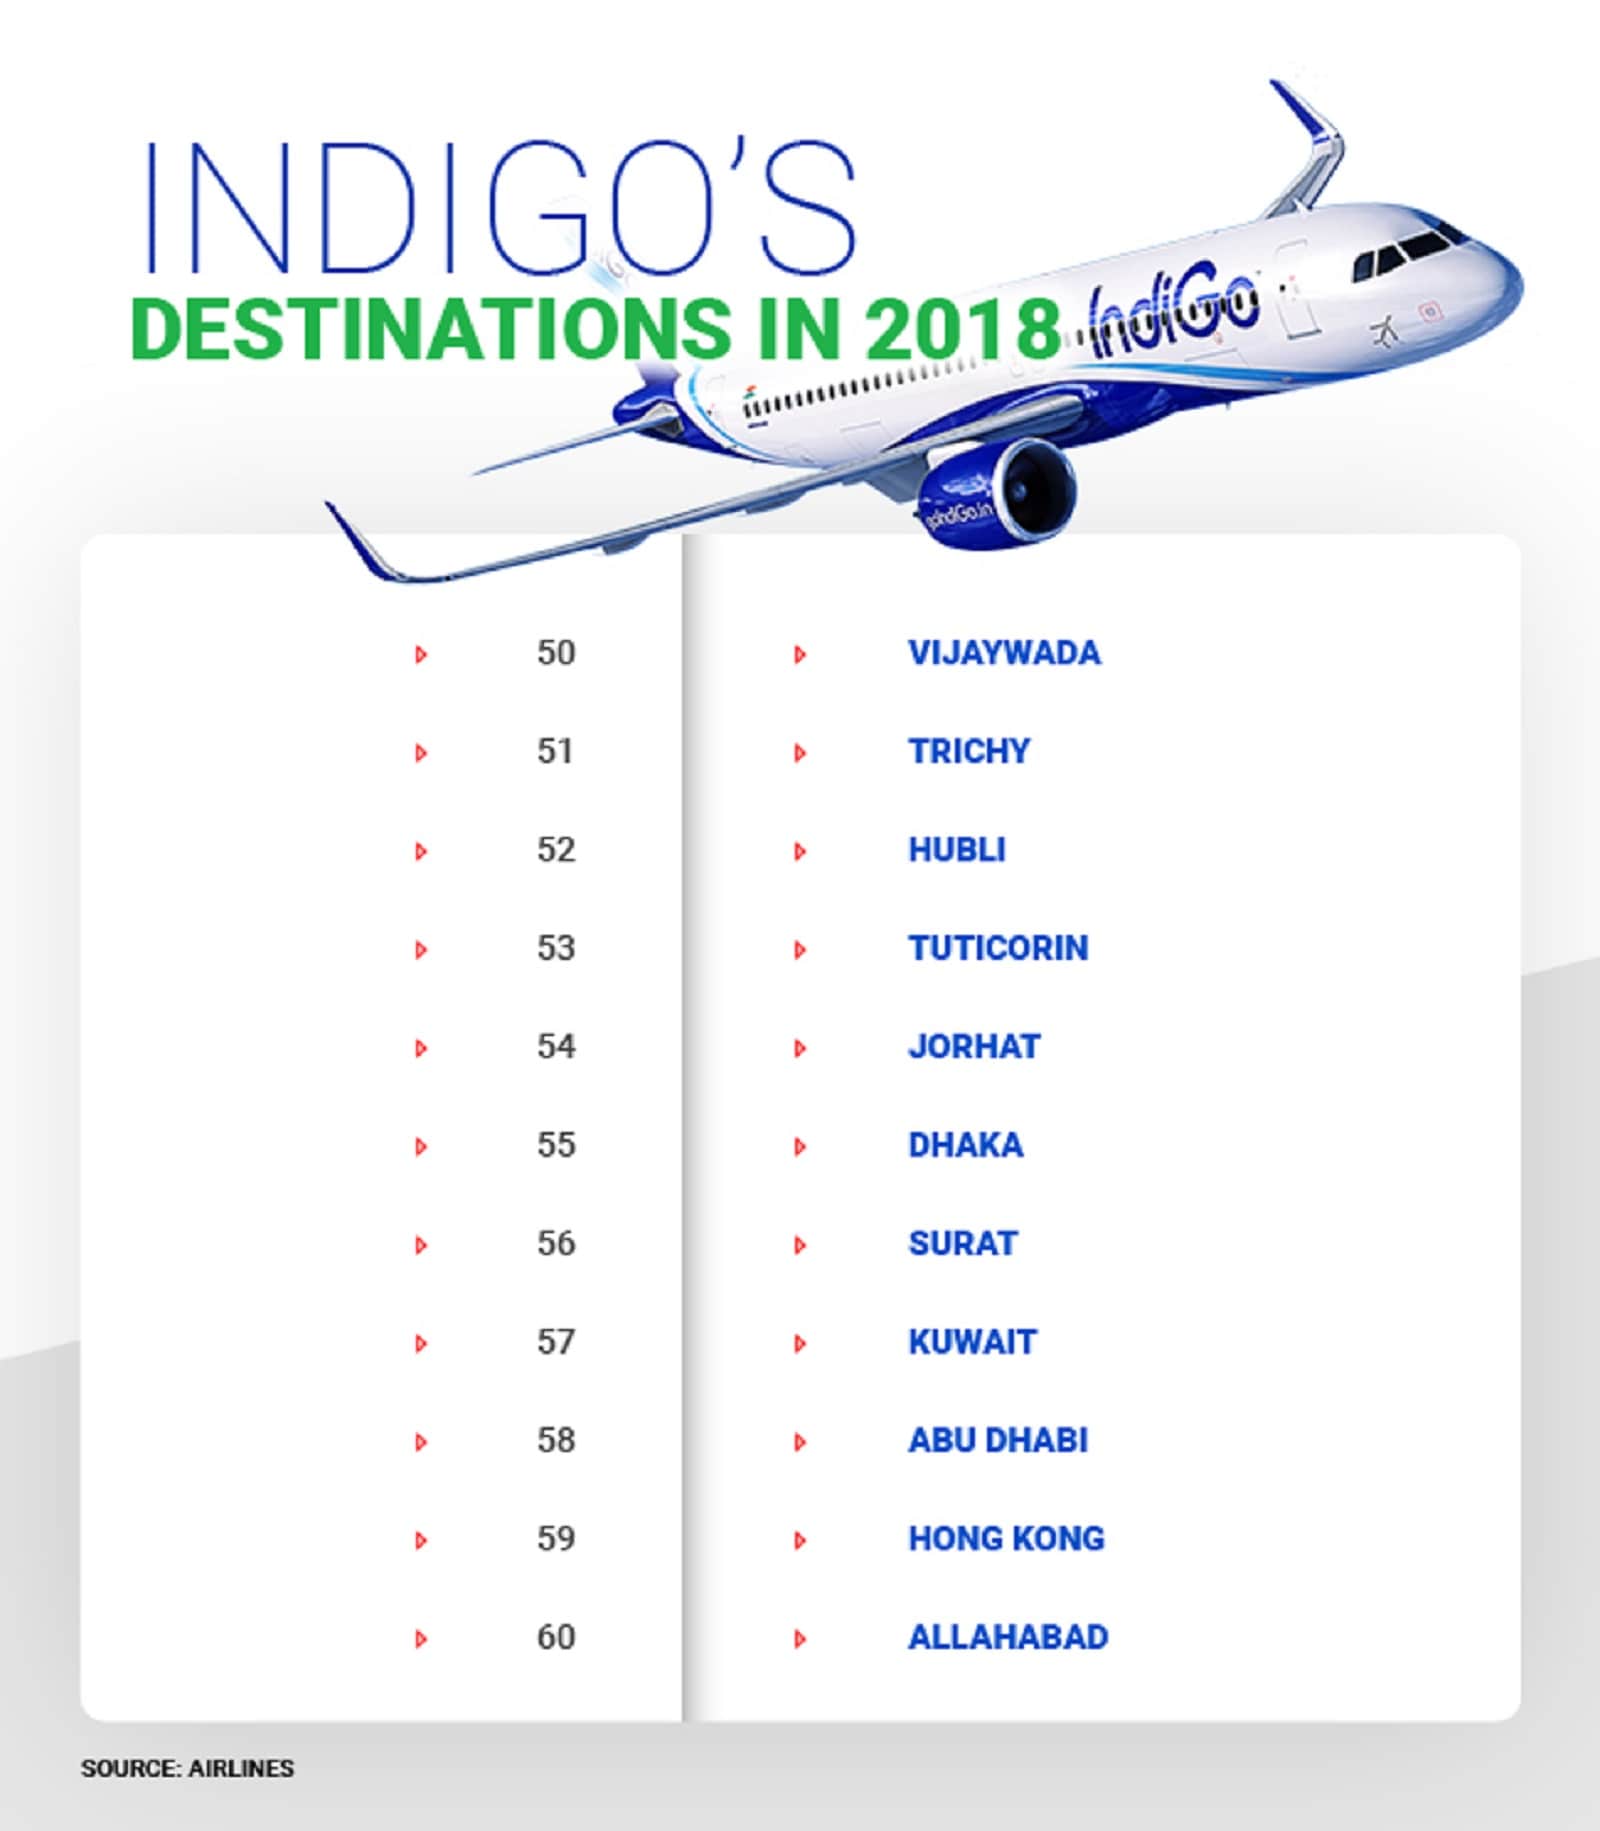 Plane Truths Indigo Added One Plane A Week In 2018, But What Next?